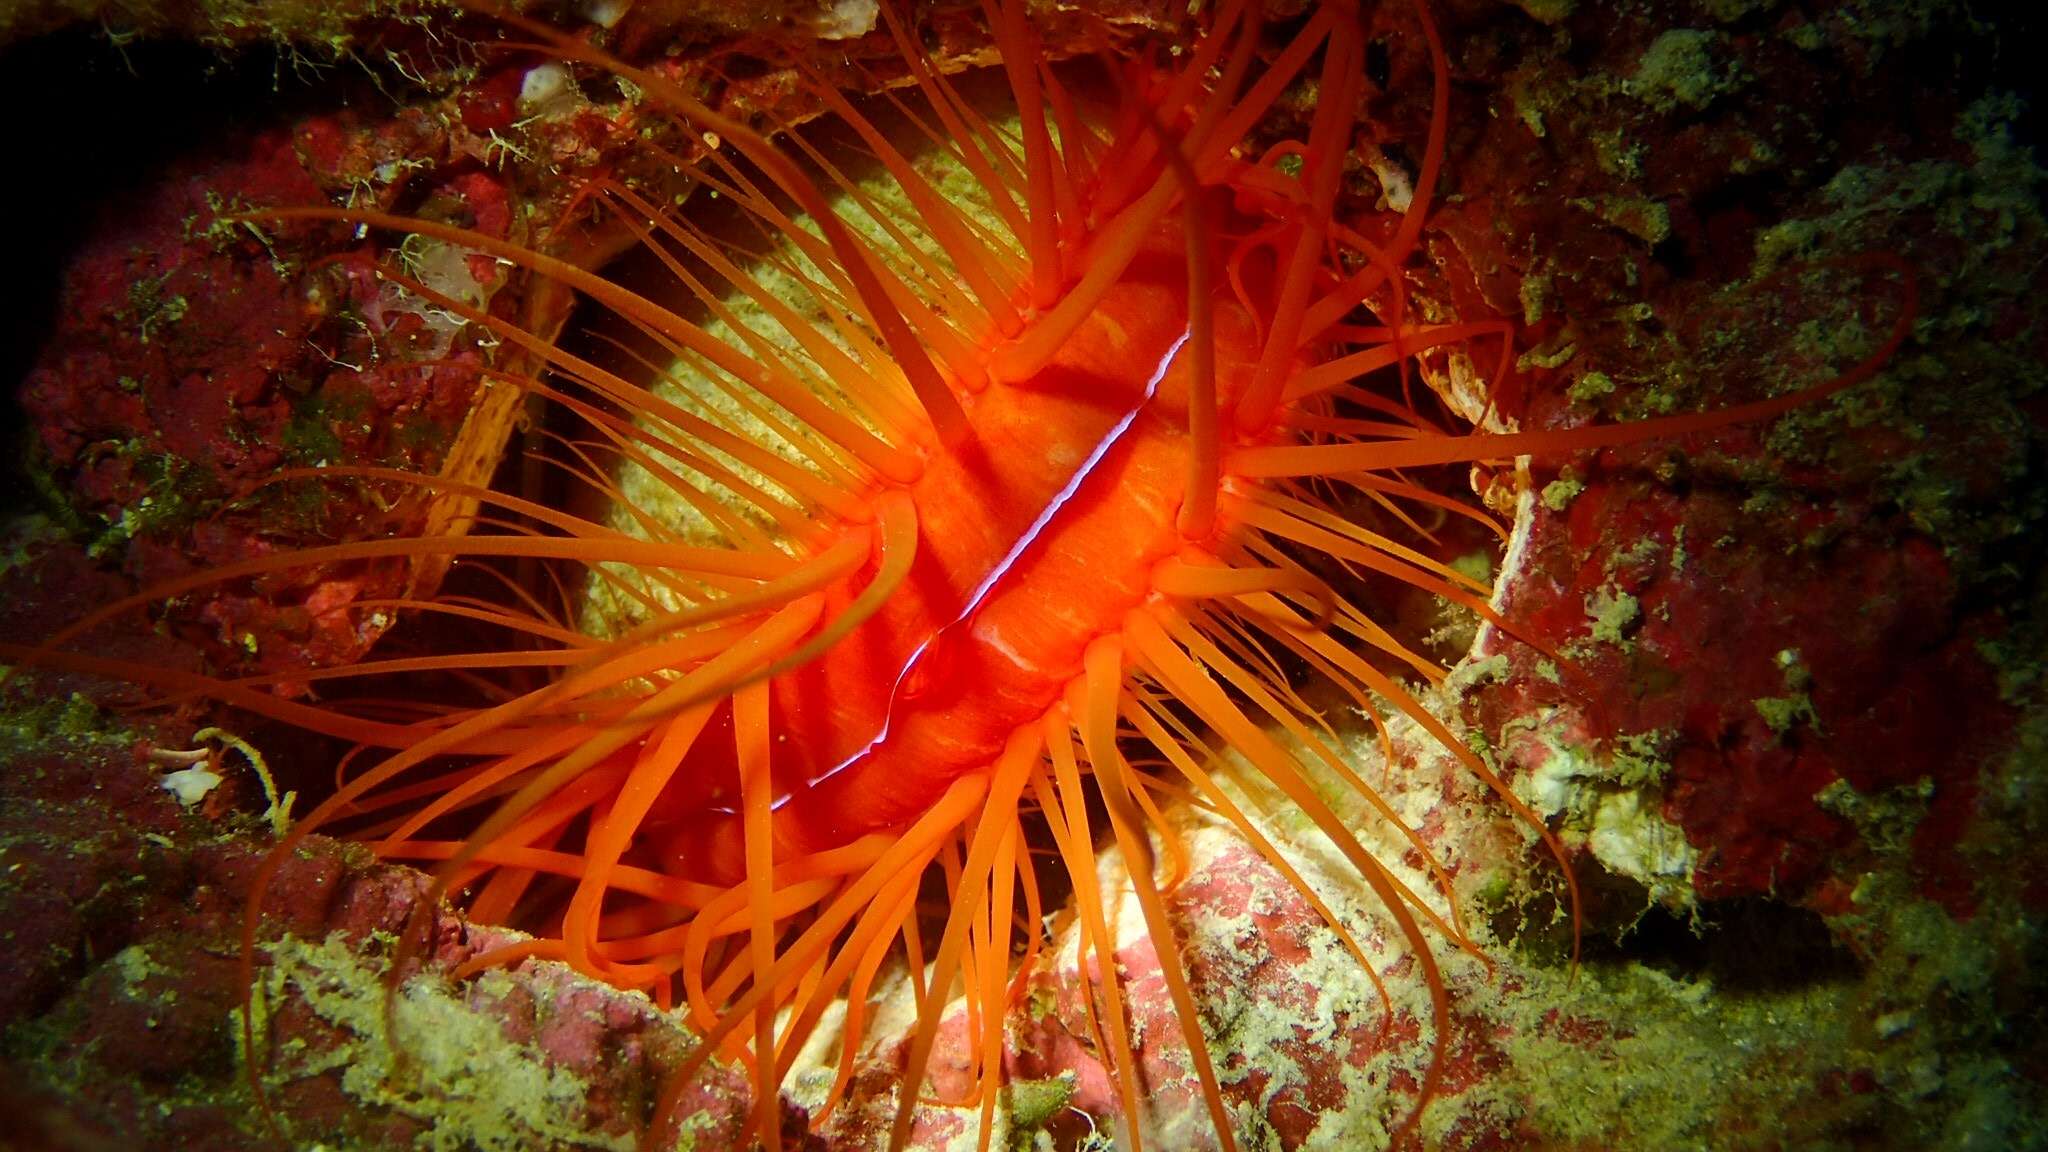 Image of Electric Flame Scallop